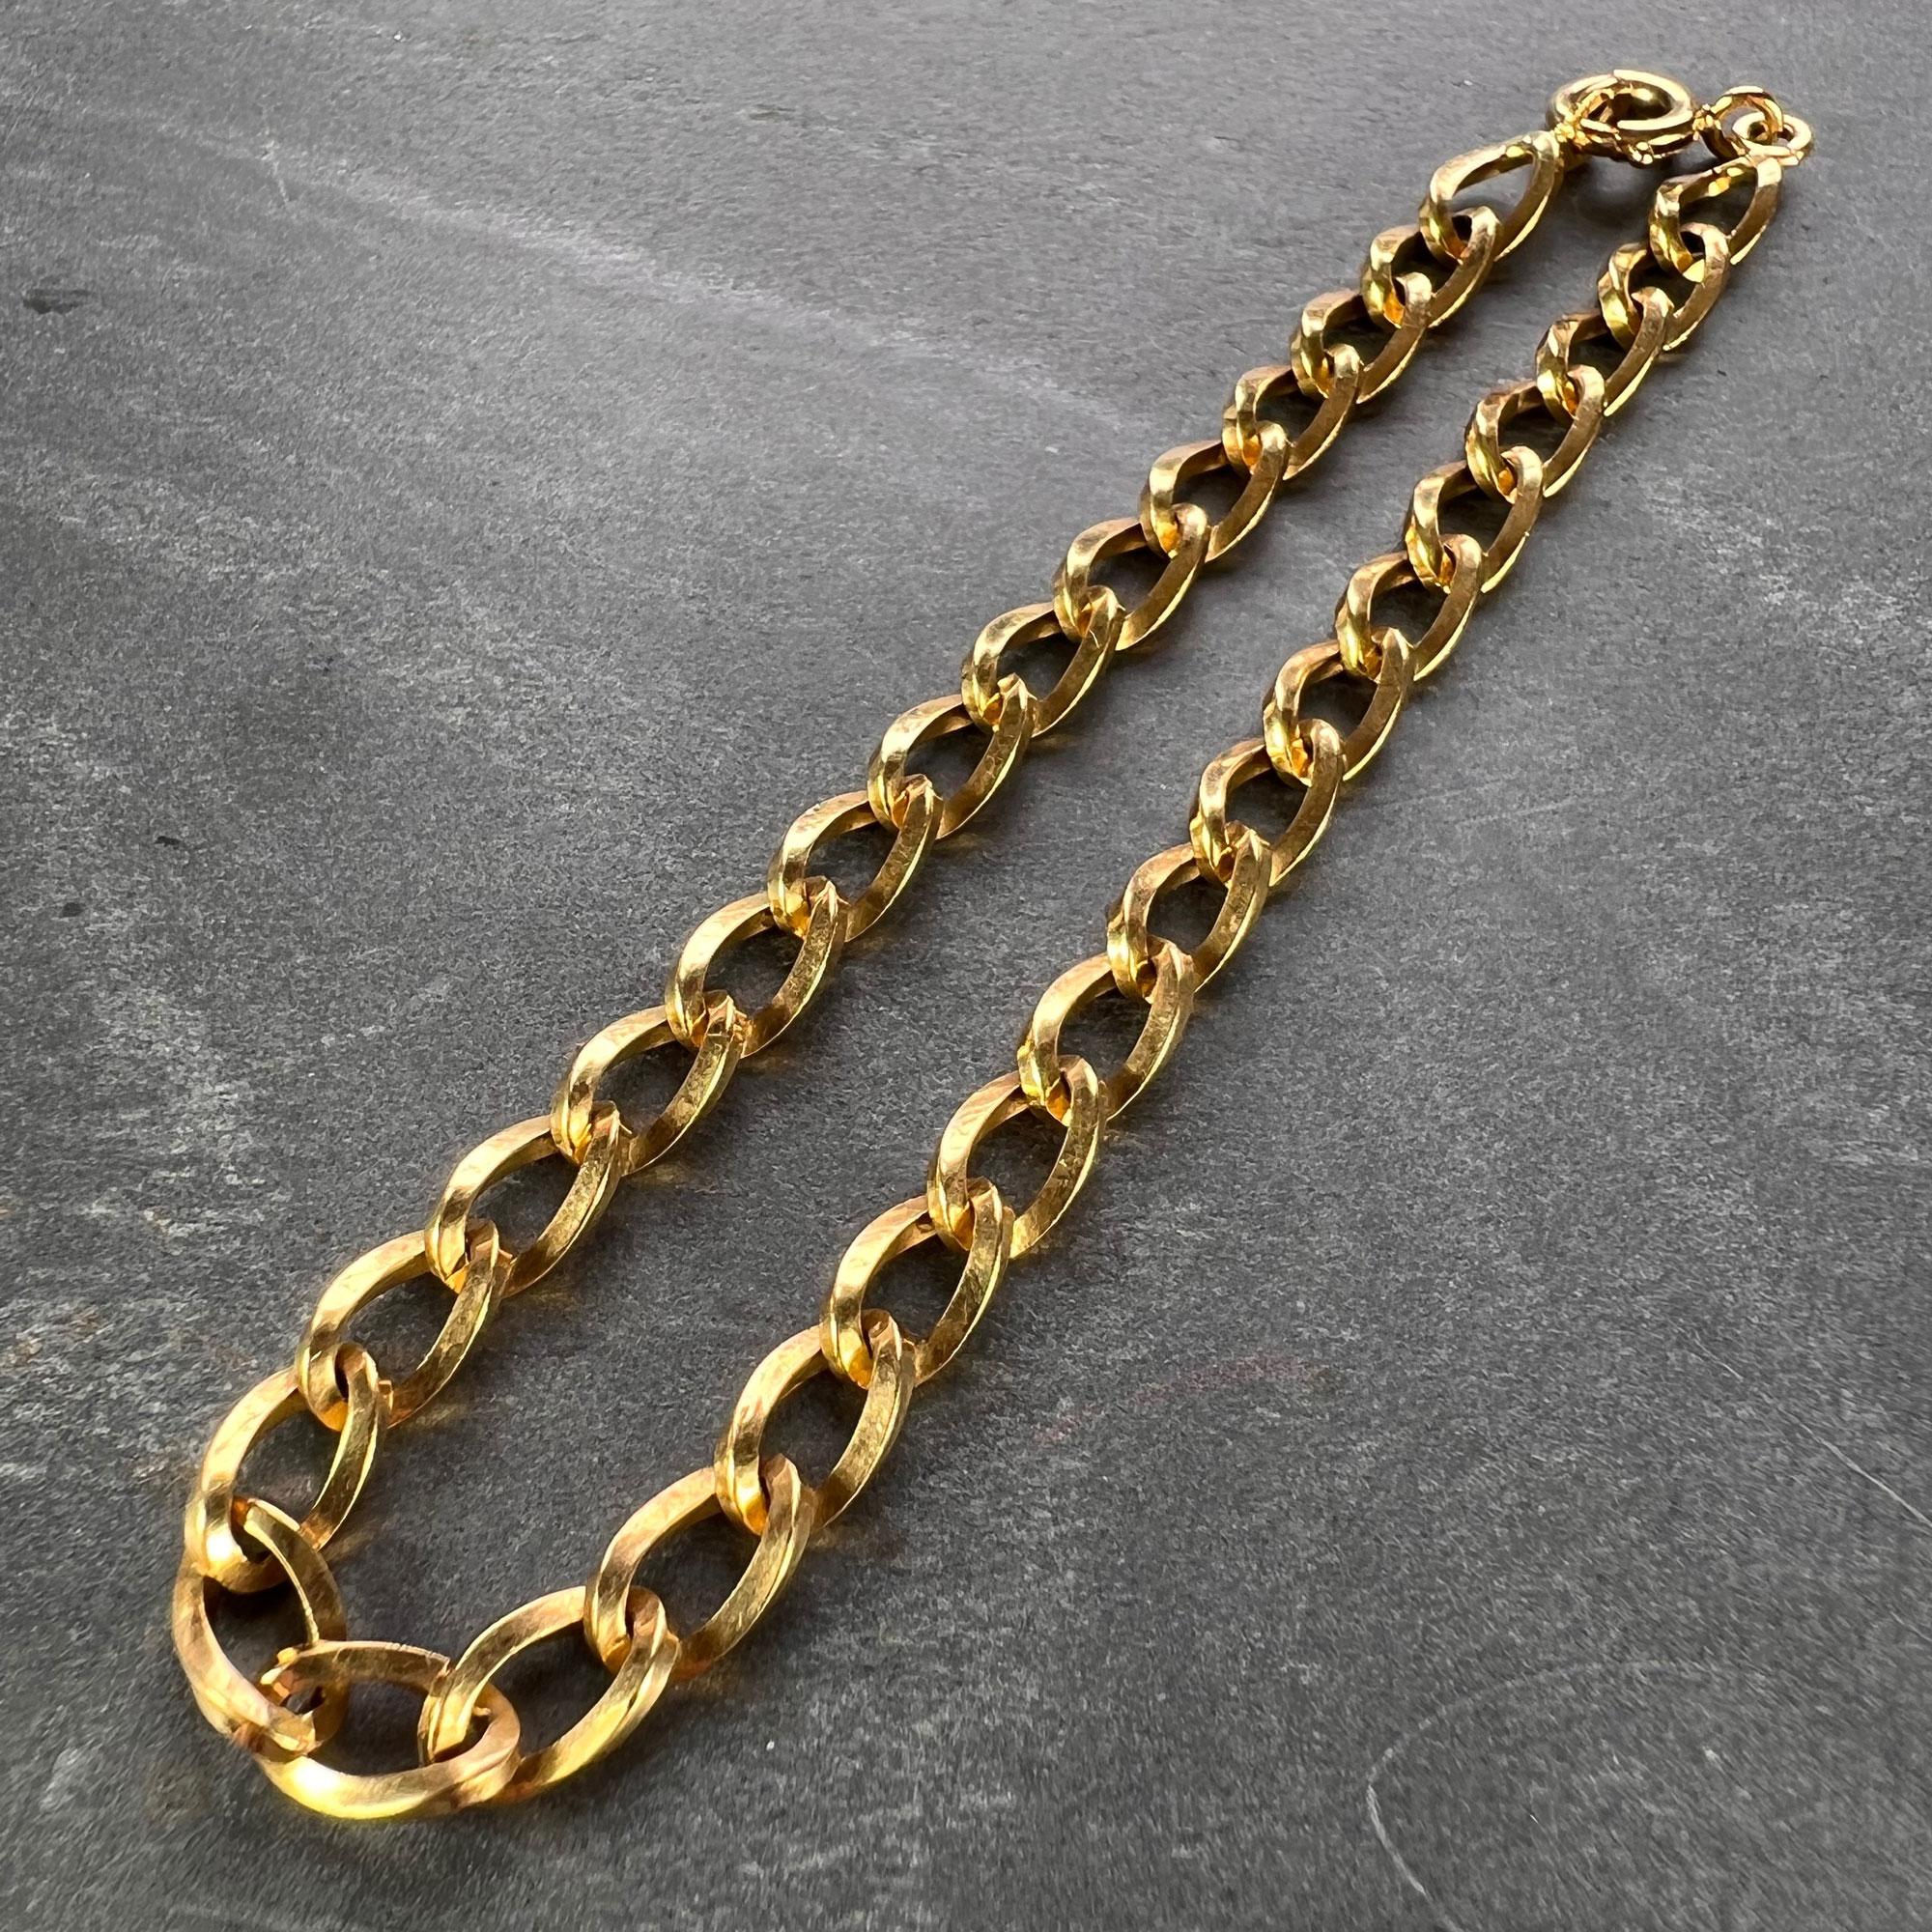 French 18 Karat Yellow Gold Twisted Curb Link Bracelet In Good Condition For Sale In London, GB